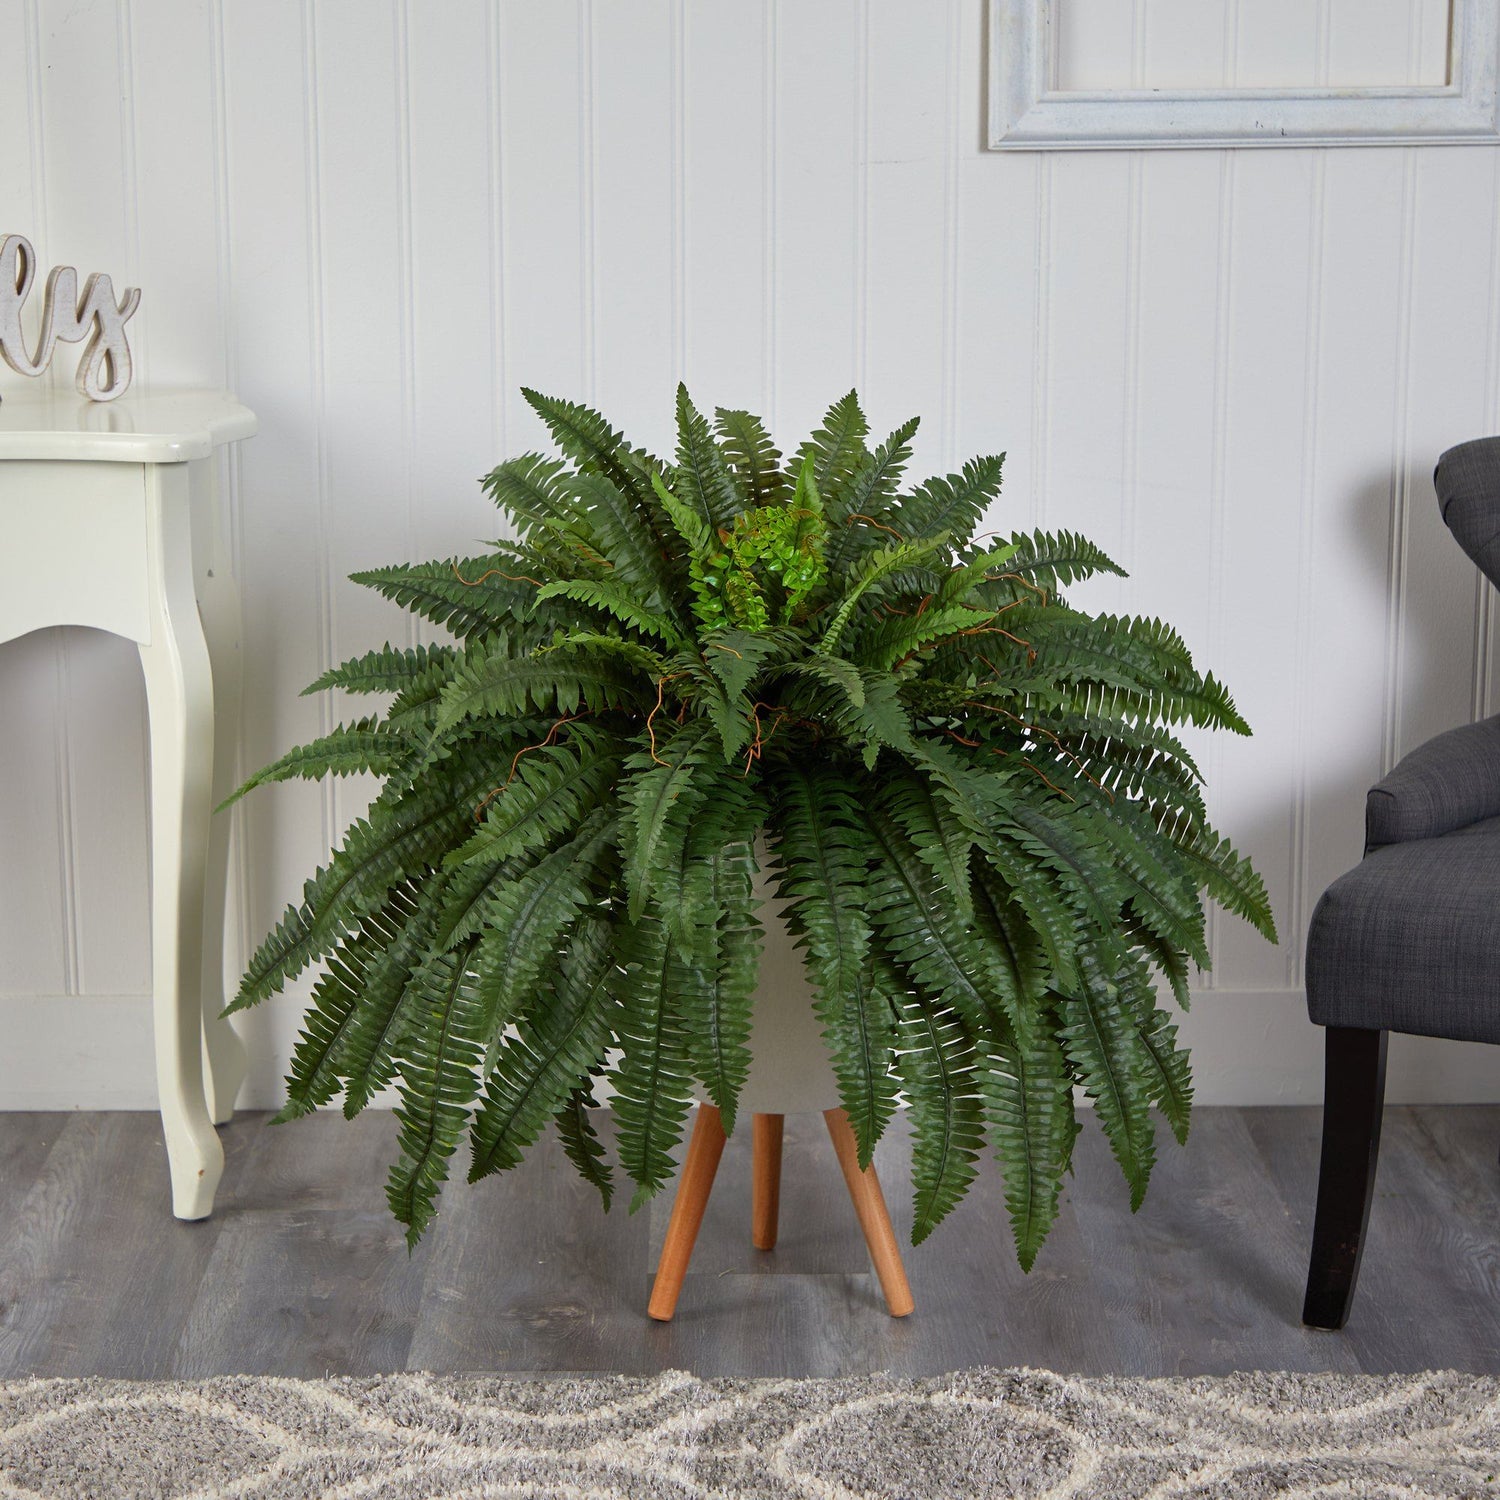 2.5’ Boston Fern Artificial Plant in White Planter with Legs